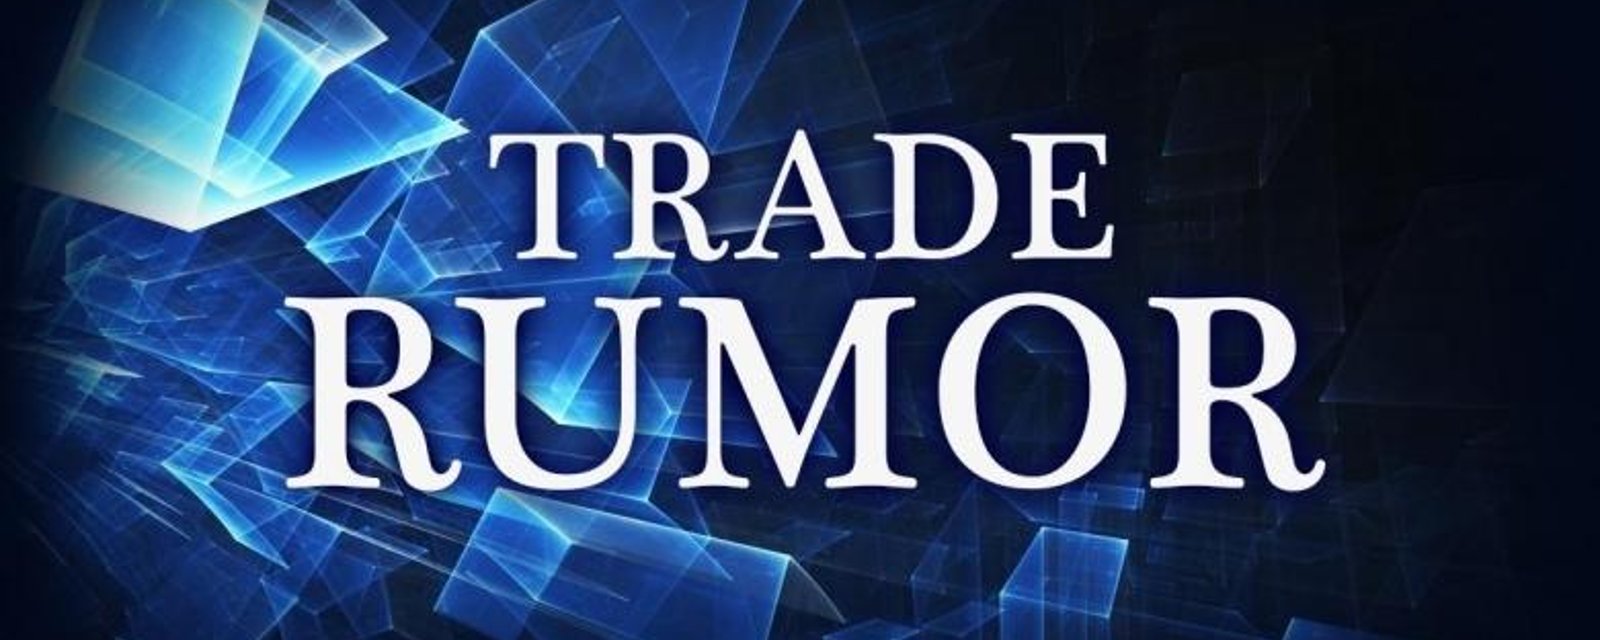 Breaking: Insider predicts major trade will happen within 24 hours.